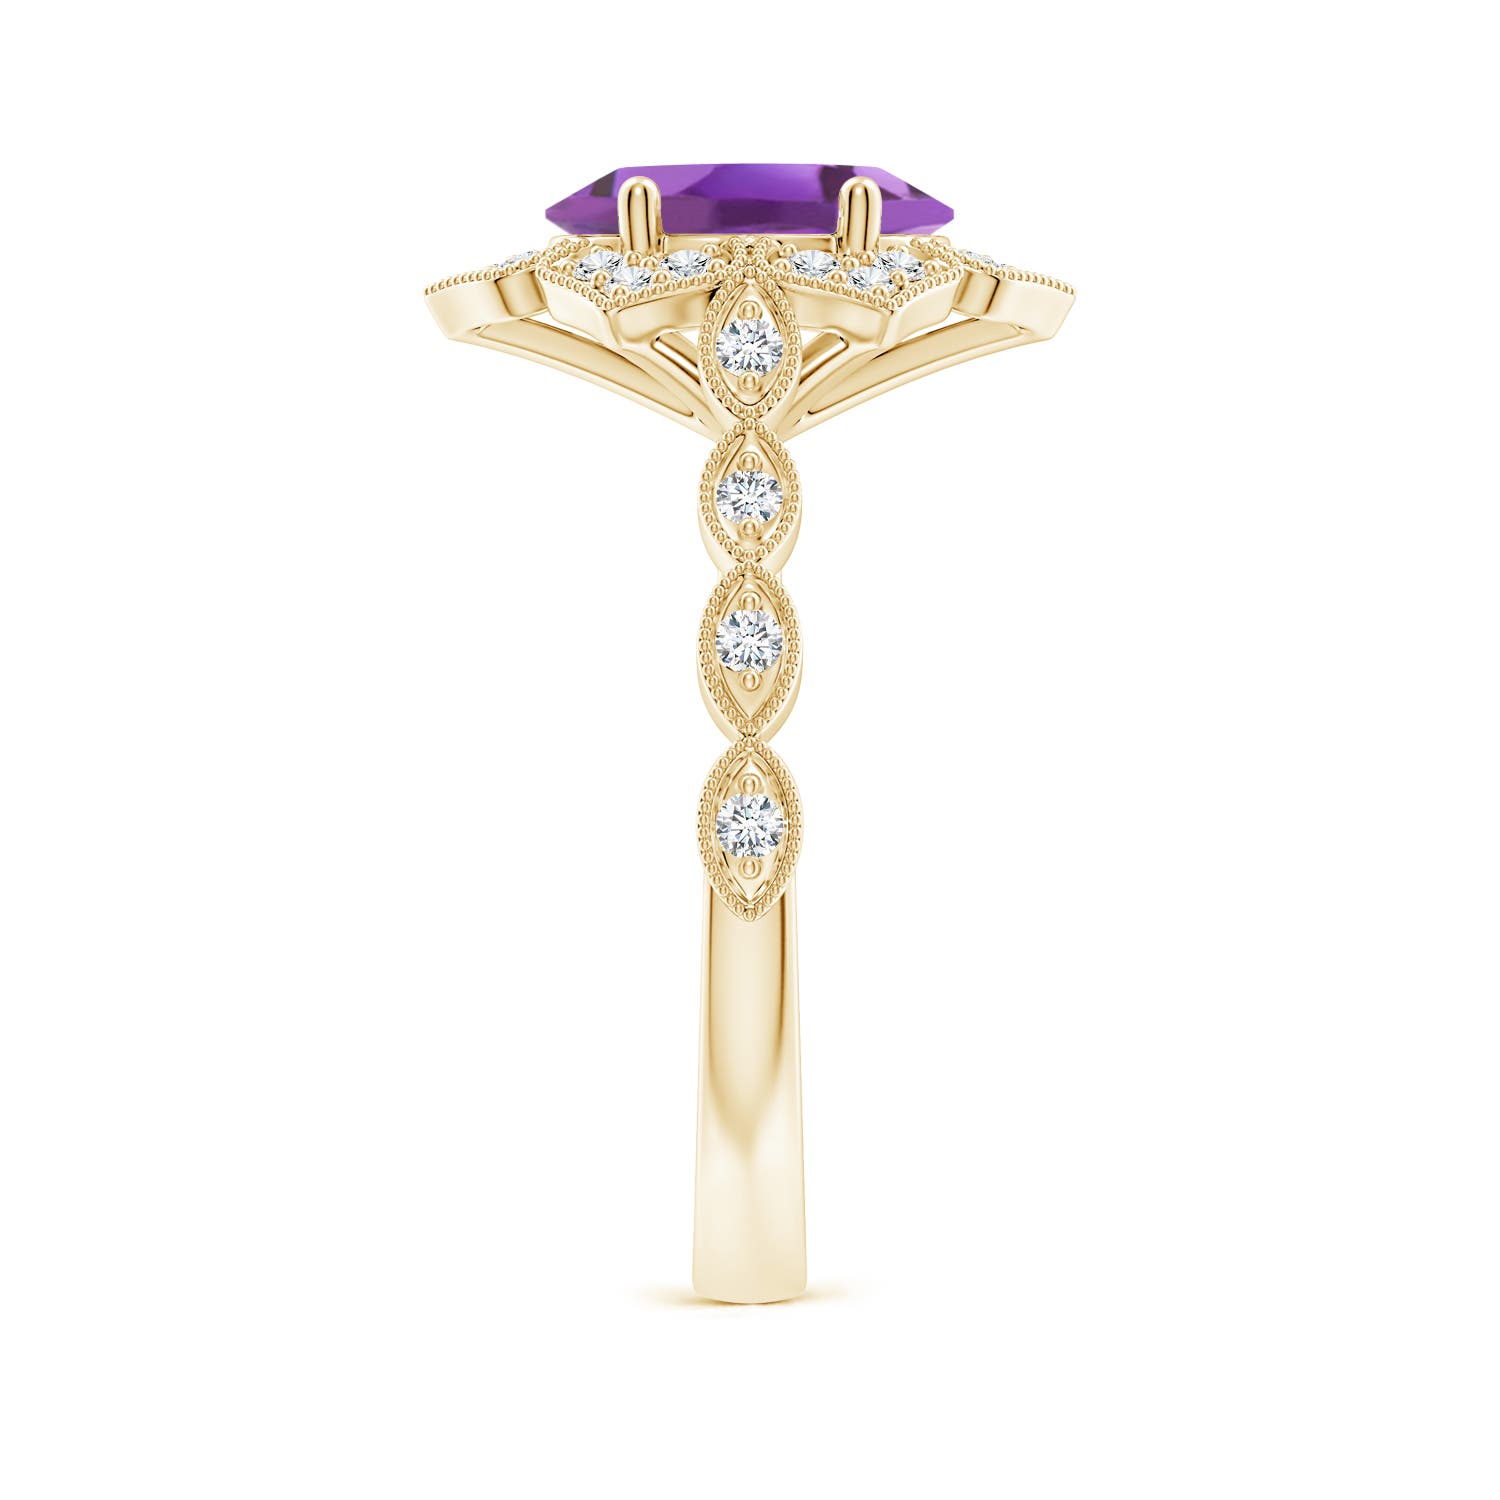 A - Amethyst / 1.86 CT / 14 KT Yellow Gold